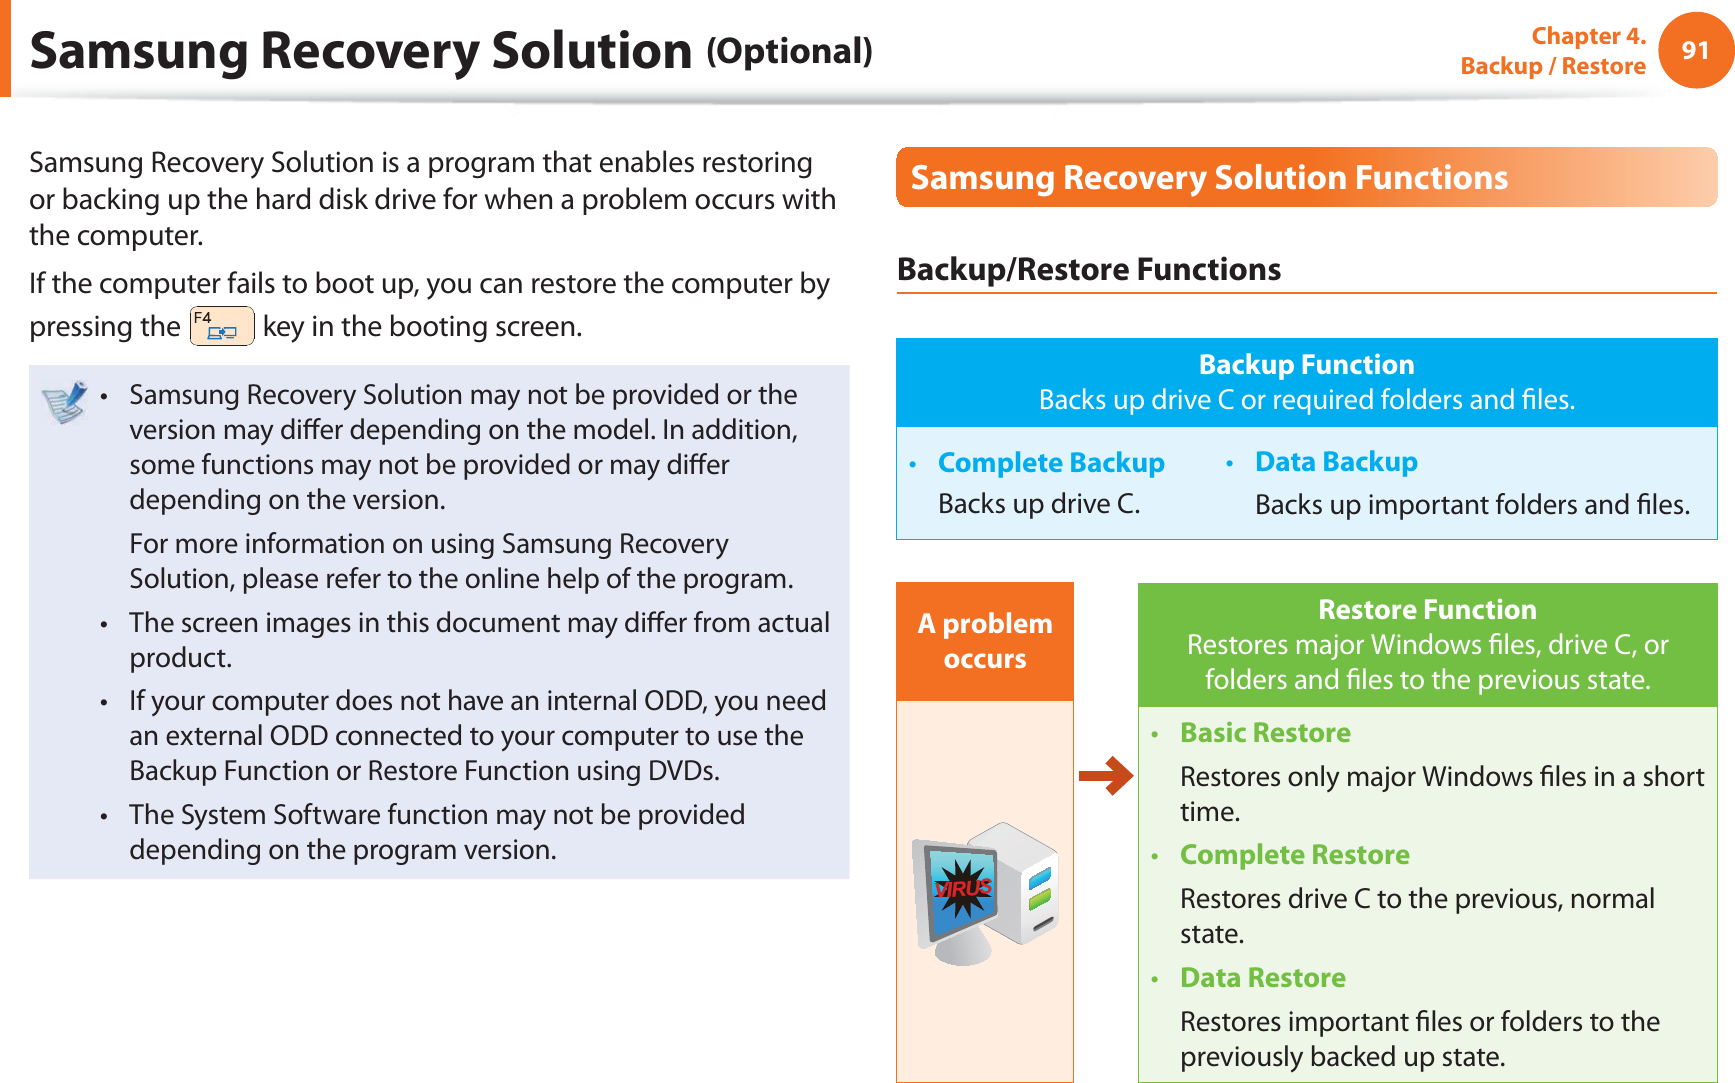 91Chapter 4.  Backup / RestoreSamsung Recovery Solution (Optional)Samsung Recovery Solution is a program that enables restoring or backing up the hard disk drive for when a problem occurs with the computer.If the computer fails to boot up, you can restore the computer by pressing the   key in the booting screen.Samsung Recovery Solution may not be provided or the t version may di er depending on the model. In addition, some functions may not be provided or may di er depending on the version.  For more information on using Samsung Recovery Solution, please refer to the online help of the program.The screen images in this document may di er from actual t product.If your computer does not have an internal ODD, you need t an external ODD connected to your computer to use the Backup Function or Restore Function using DVDs.The System Software function may not be provided t depending on the program version.Samsung Recovery Solution FunctionsBackup/Restore FunctionsBackup FunctionBacks up drive C or required folders and  les.Complete Backupt   Backs up drive C.Data Backupt   Backs up important folders and  les.A problem occursVIRUSRestore FunctionRestores major Windows  les, drive C, or folders and  les to the previous state.Basic Restoret   Restores only major Windows  les in a short time.Complete Restoret   Restores drive C to the previous, normal state.Data Restoret   Restores important  les or folders to the previously backed up state.